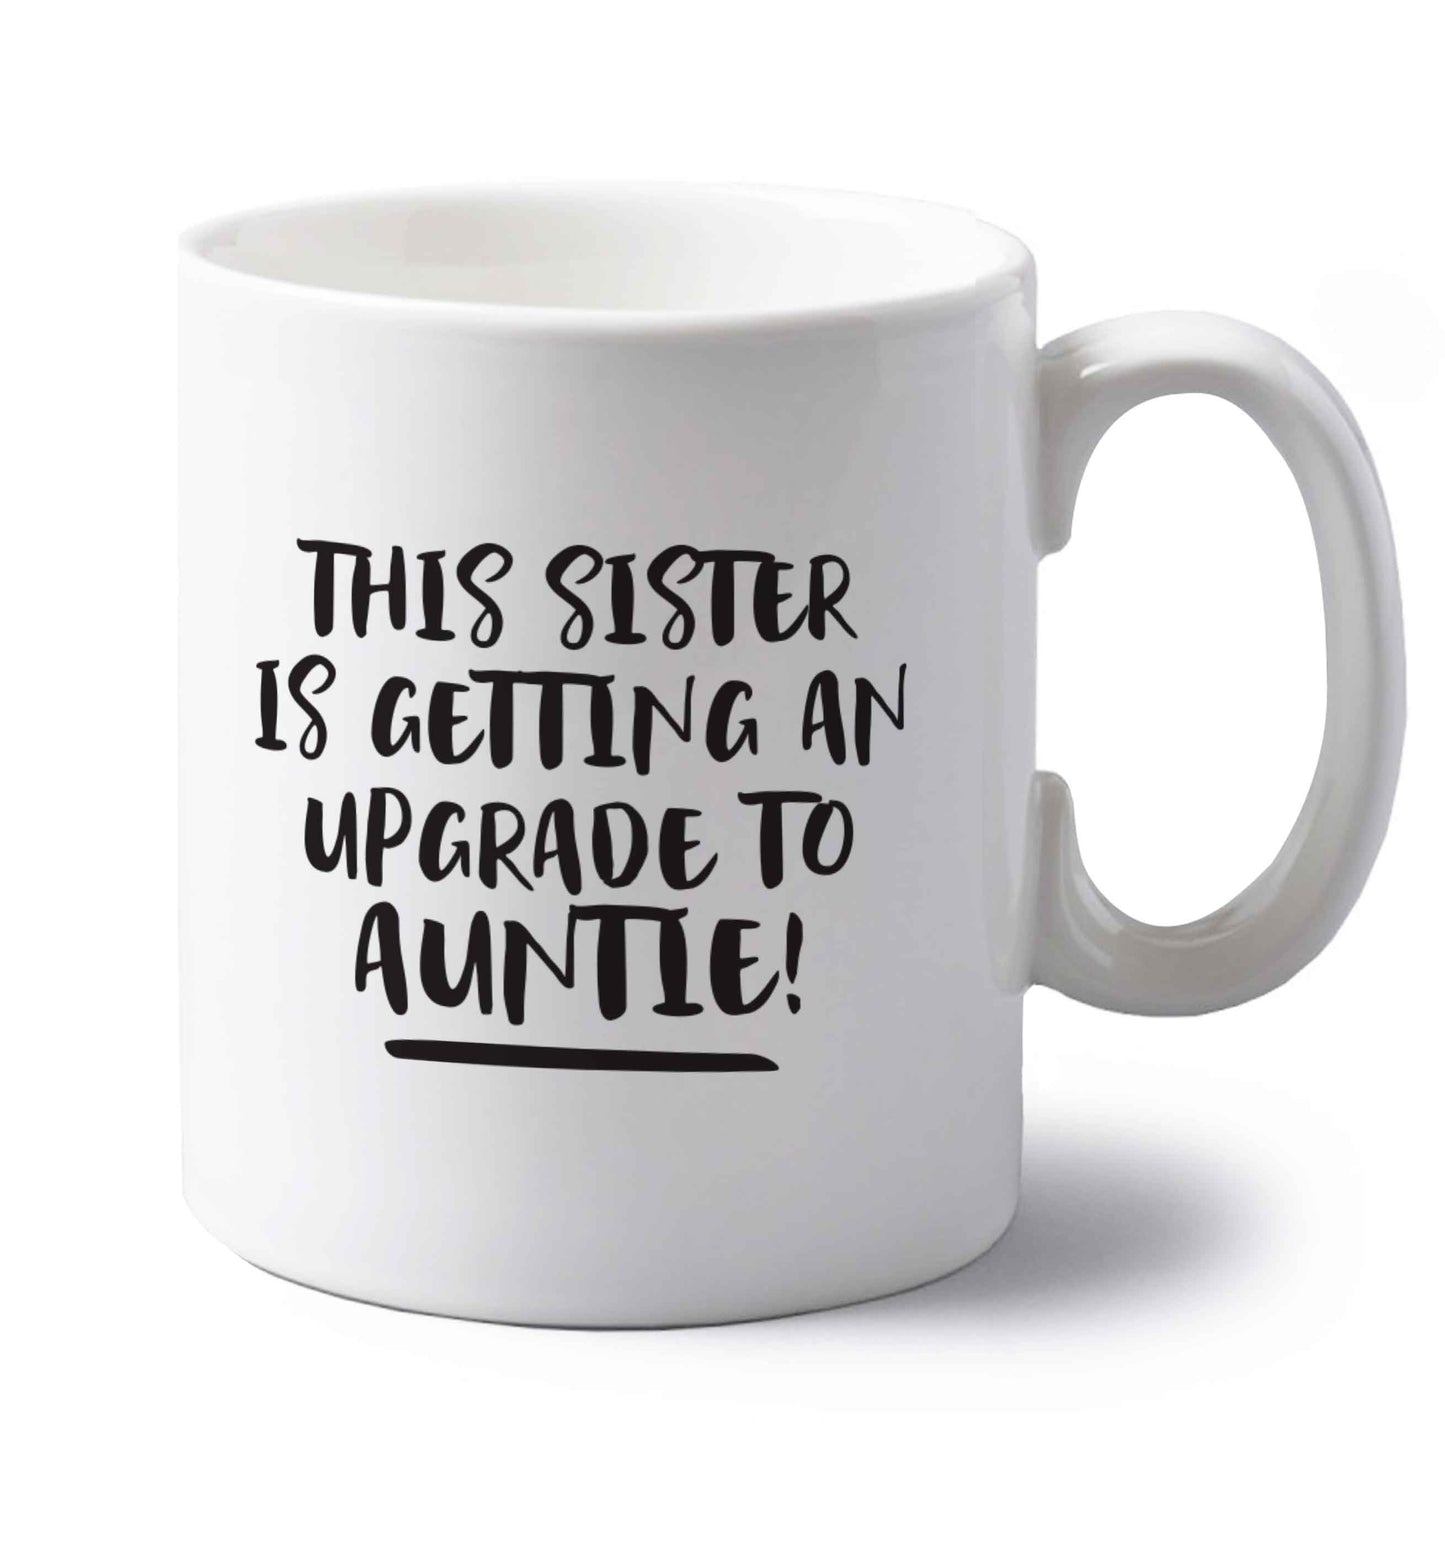 This sister is getting an upgrade to auntie! left handed white ceramic mug 